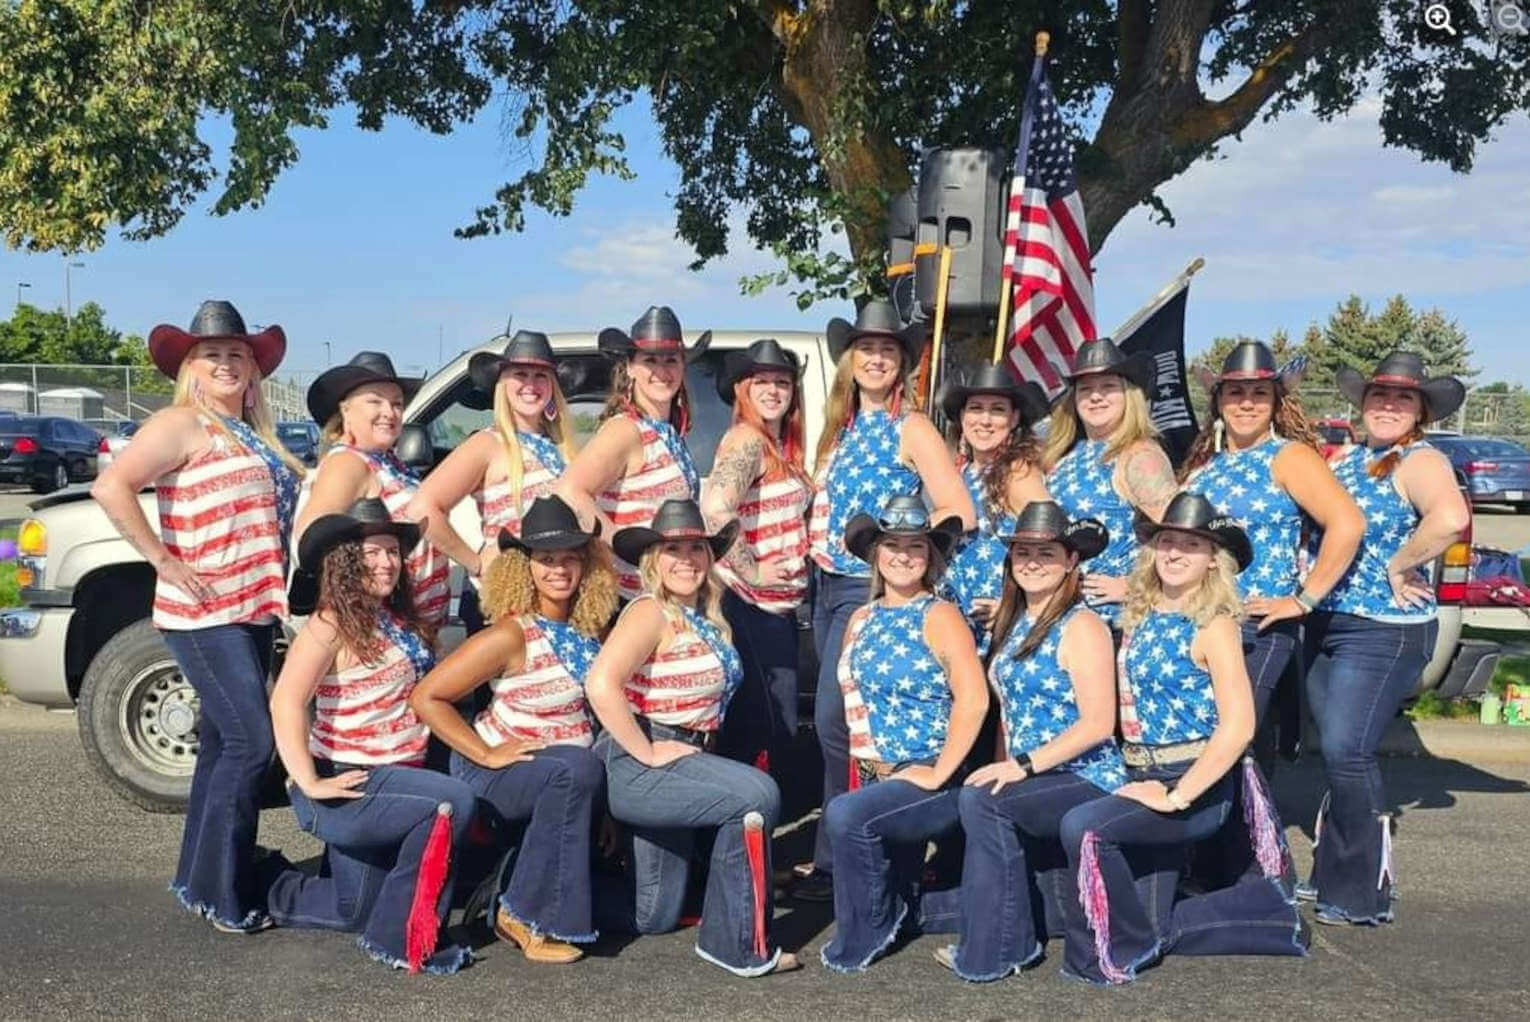 American Flag Canceled at Seattle Dance Competition After Patriotic Team ‘Triggered’ Crowd